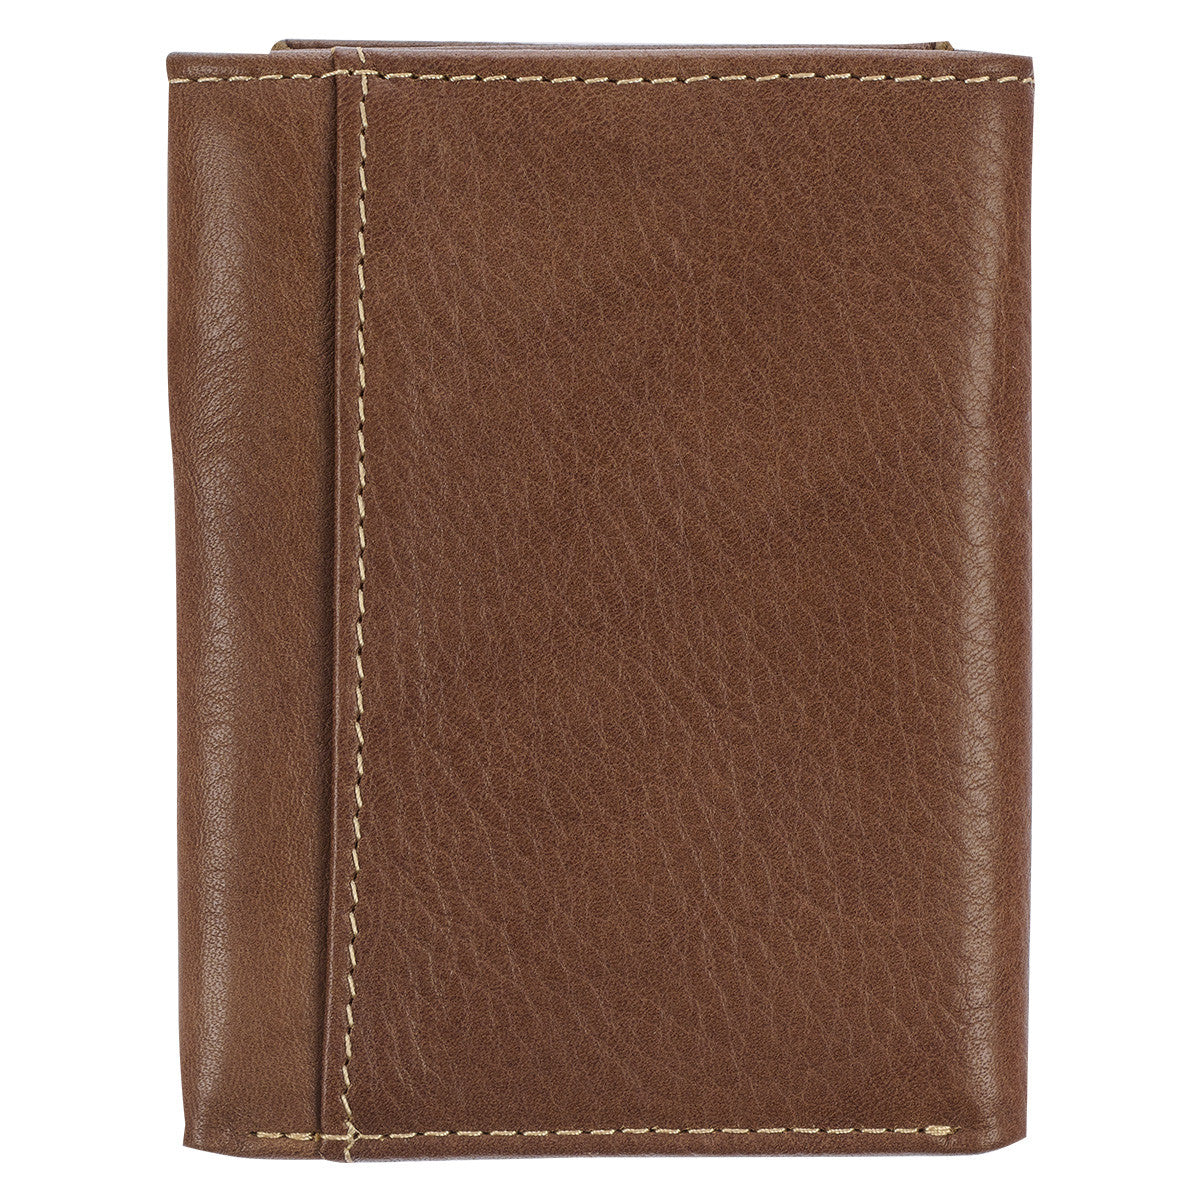 Ichthus Fish Brown Genuine Leather Trifold Wallet